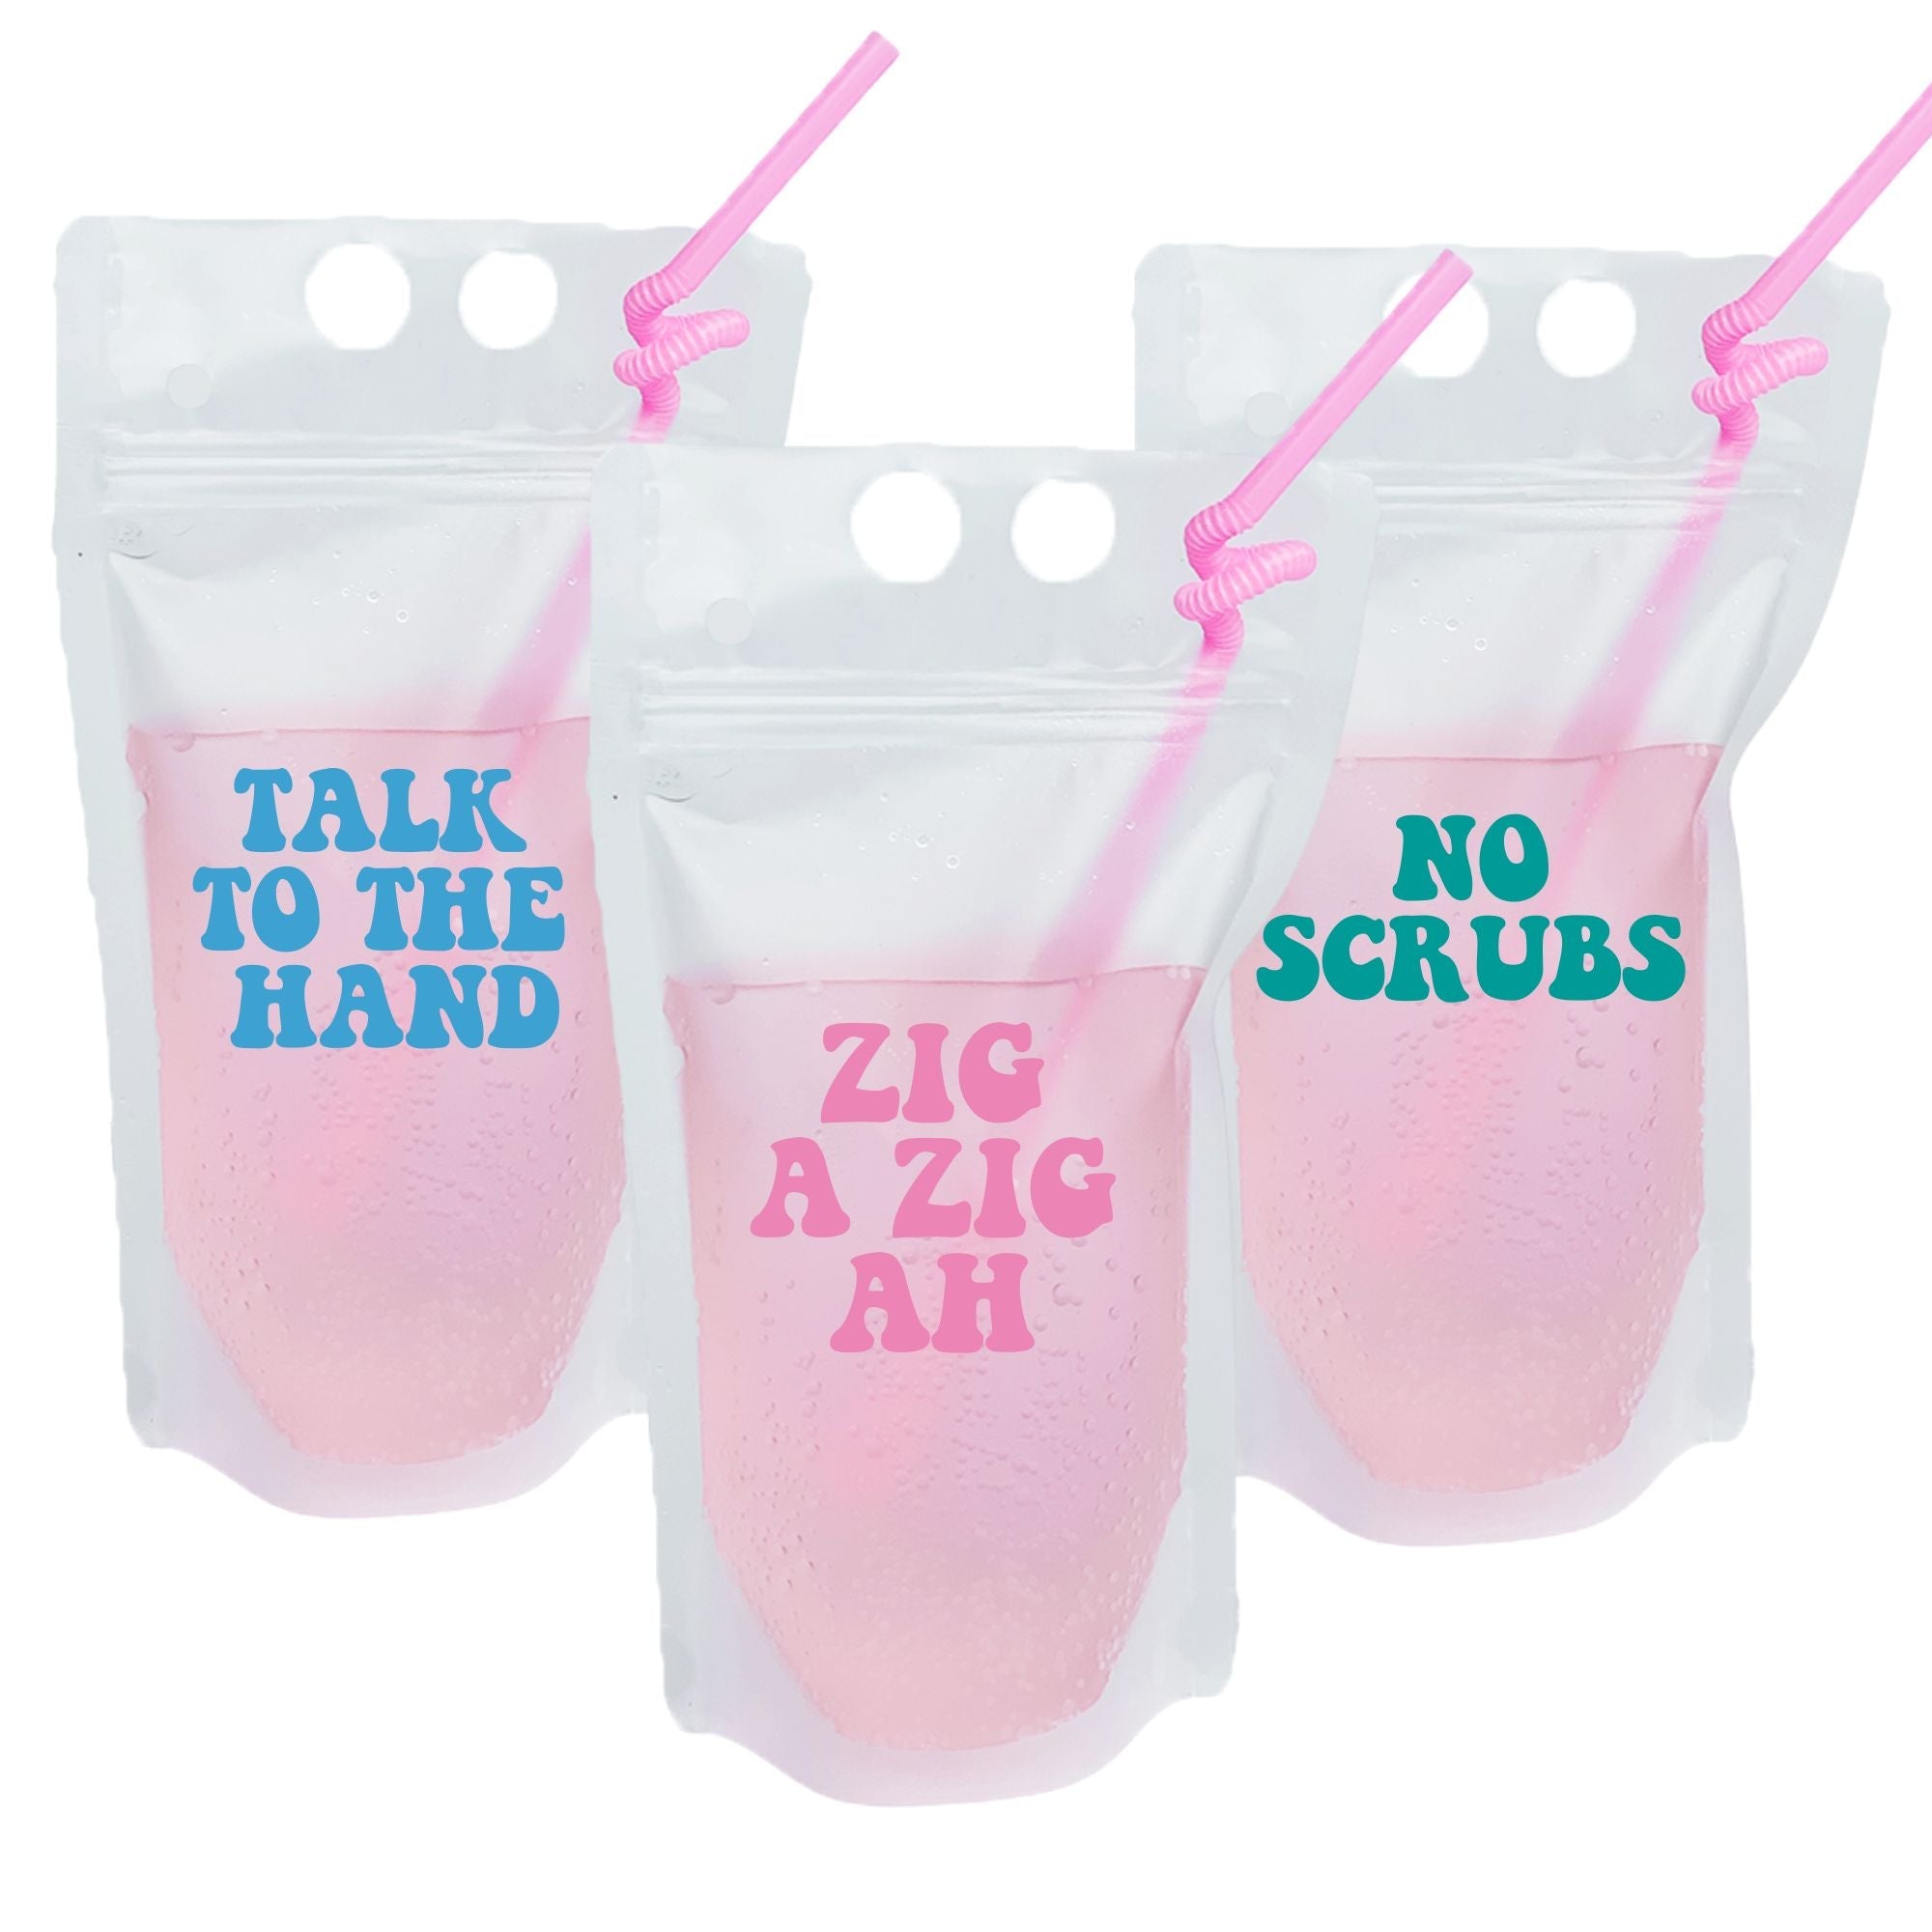 Booze Pouches, Adult Juice Boxes Drink Pouches, Western Party